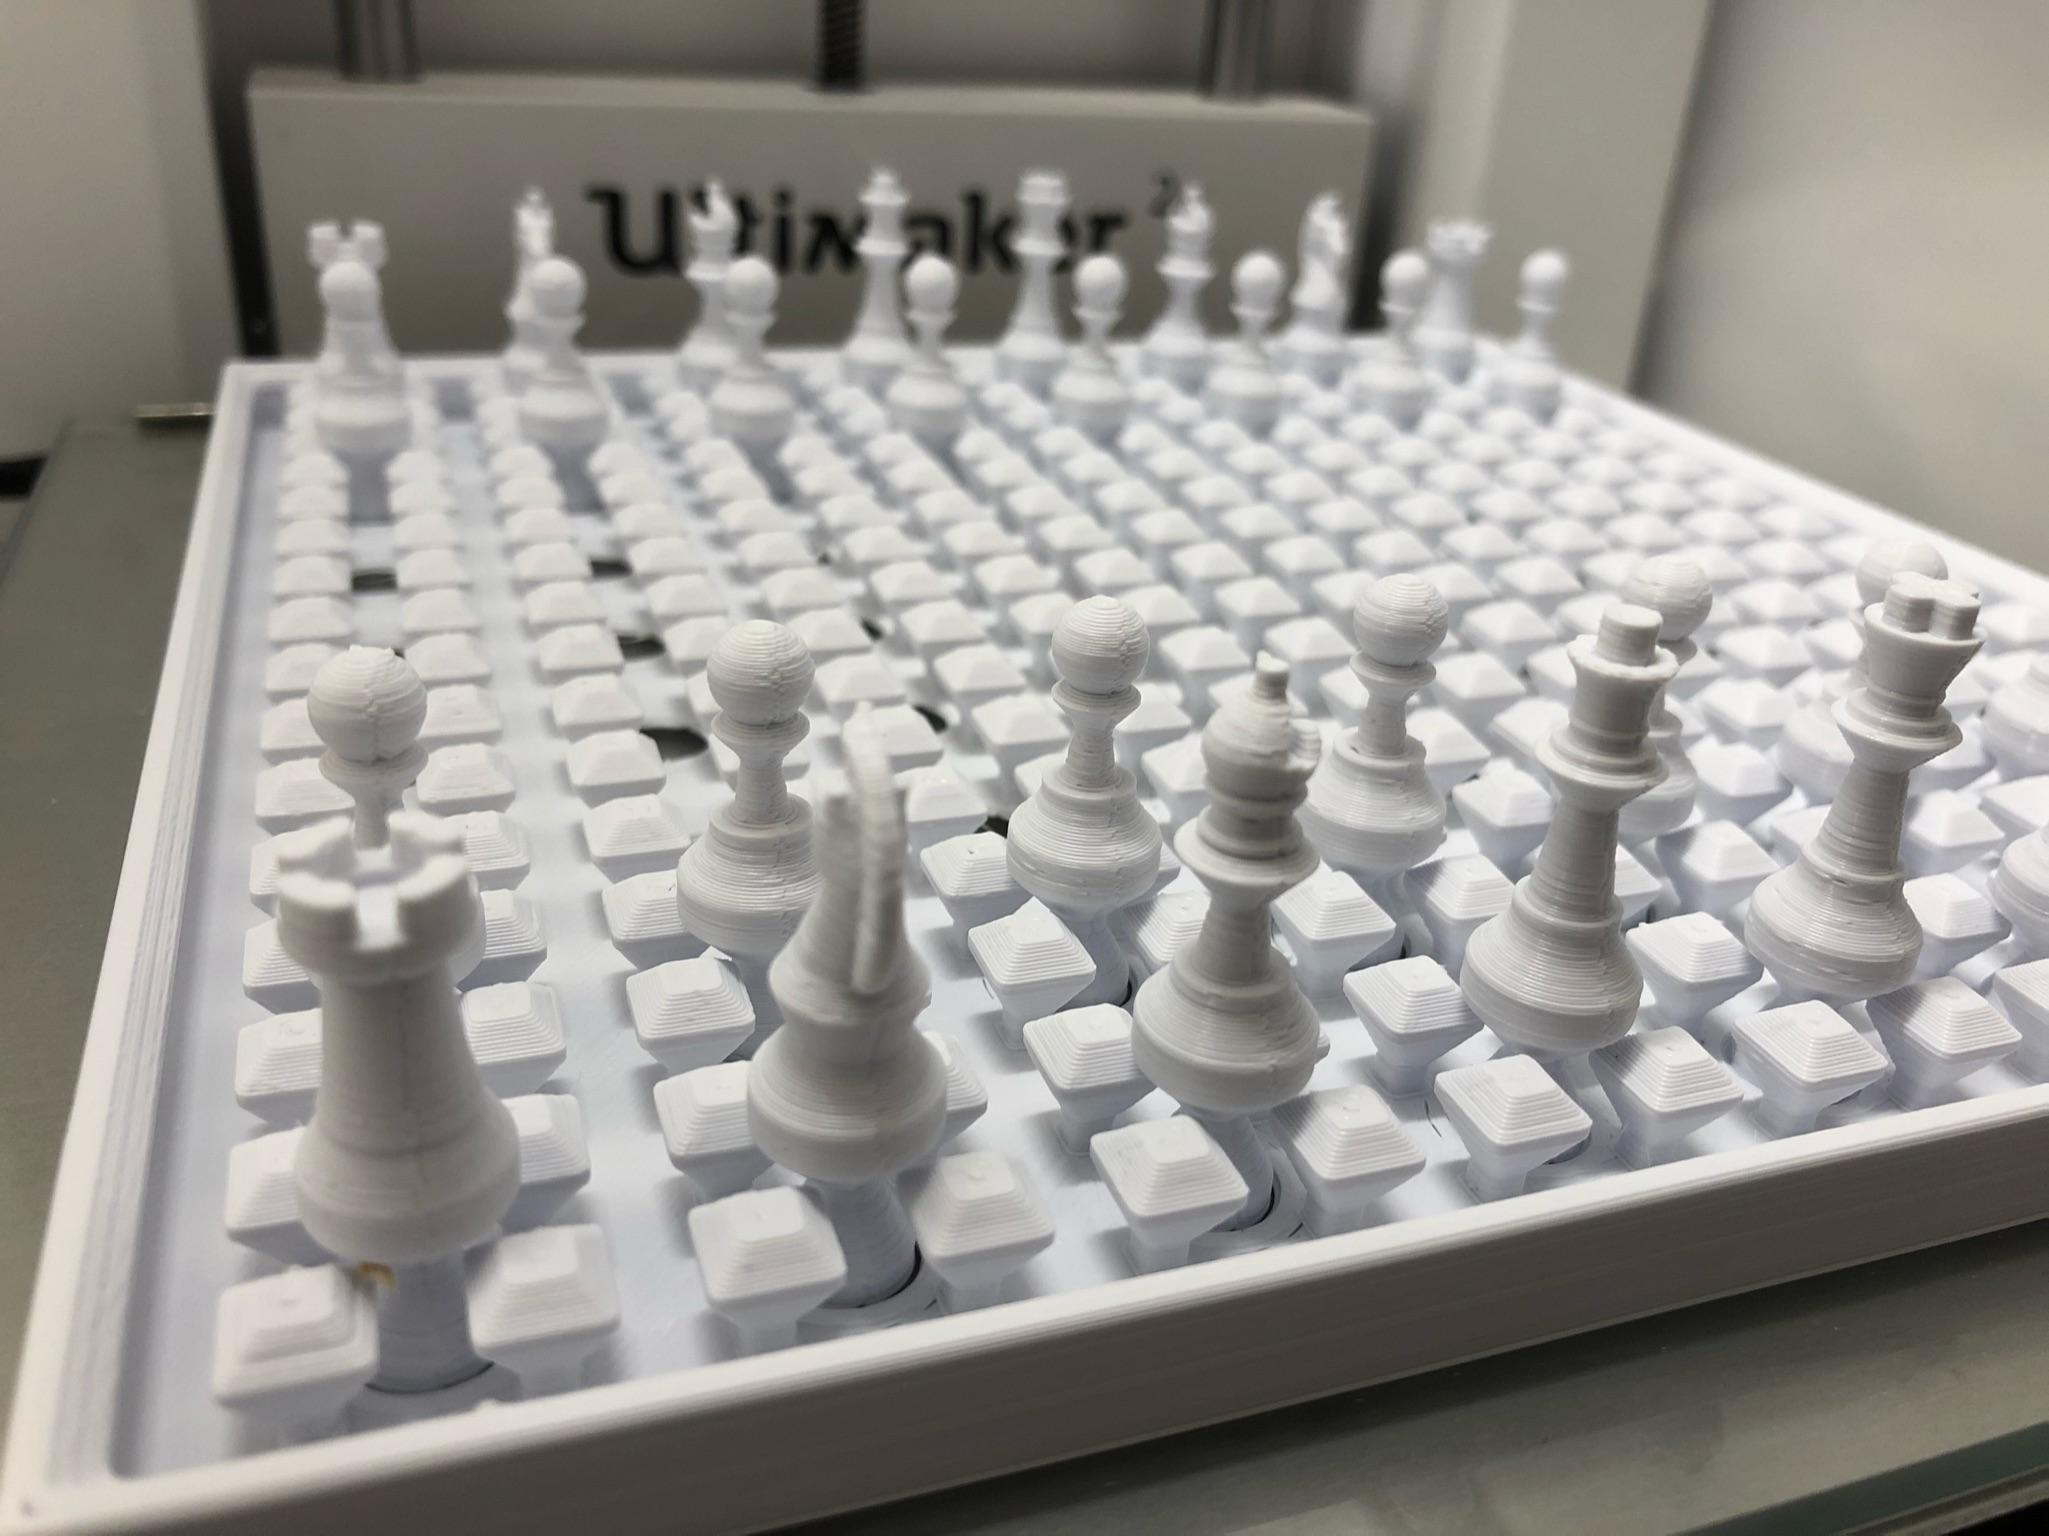 Print-in-Place Chess Set with Captive Pieces - 3D model by DaveMakesStuff  on Thangs